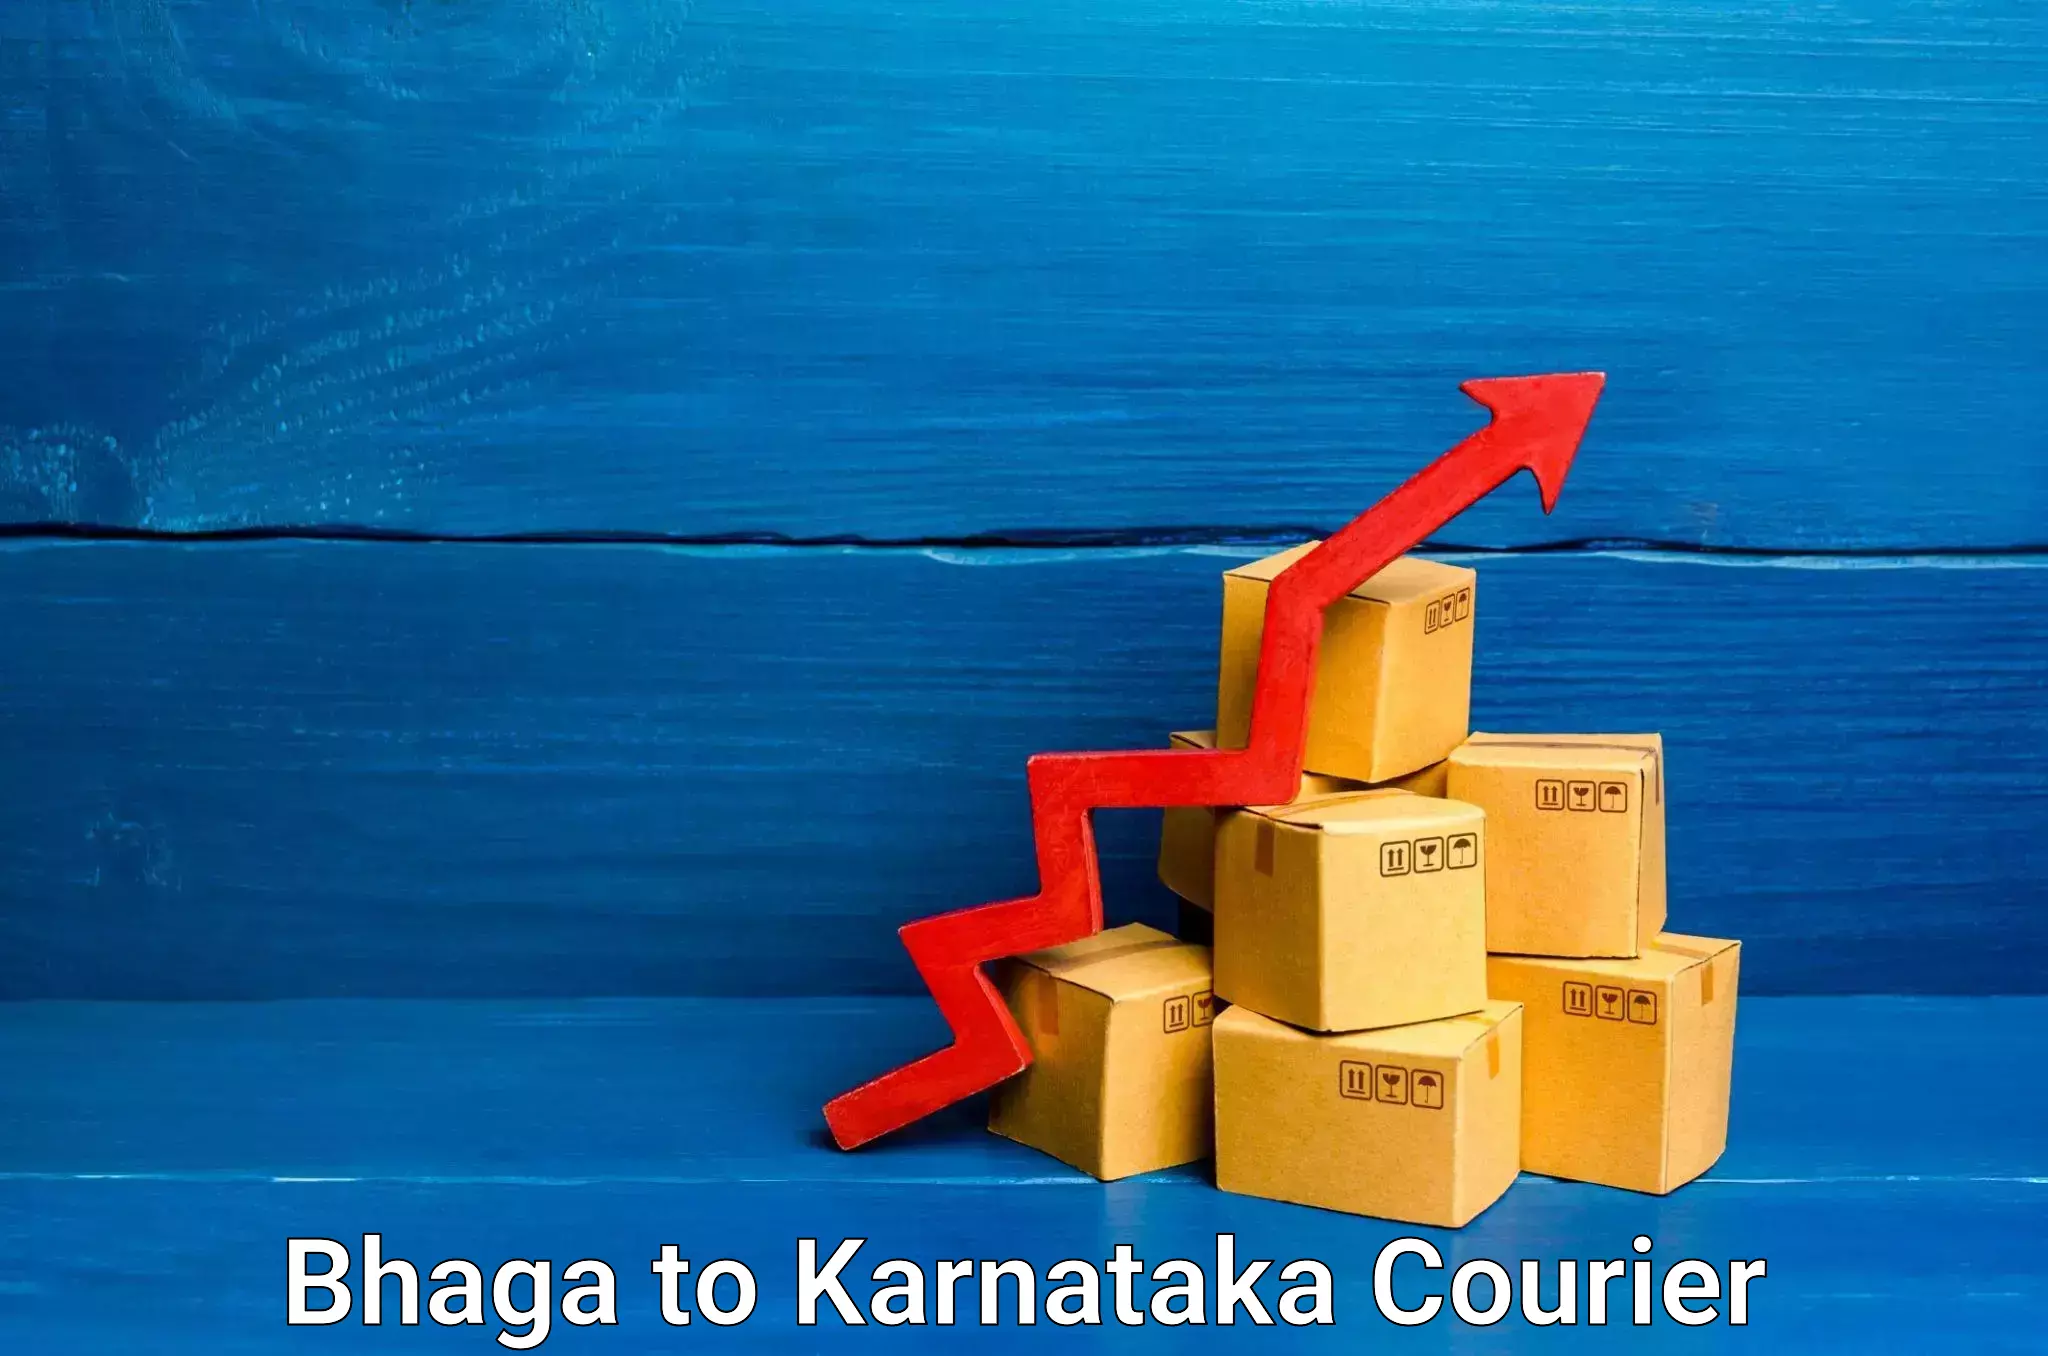 Reliable courier service Bhaga to Yellapur